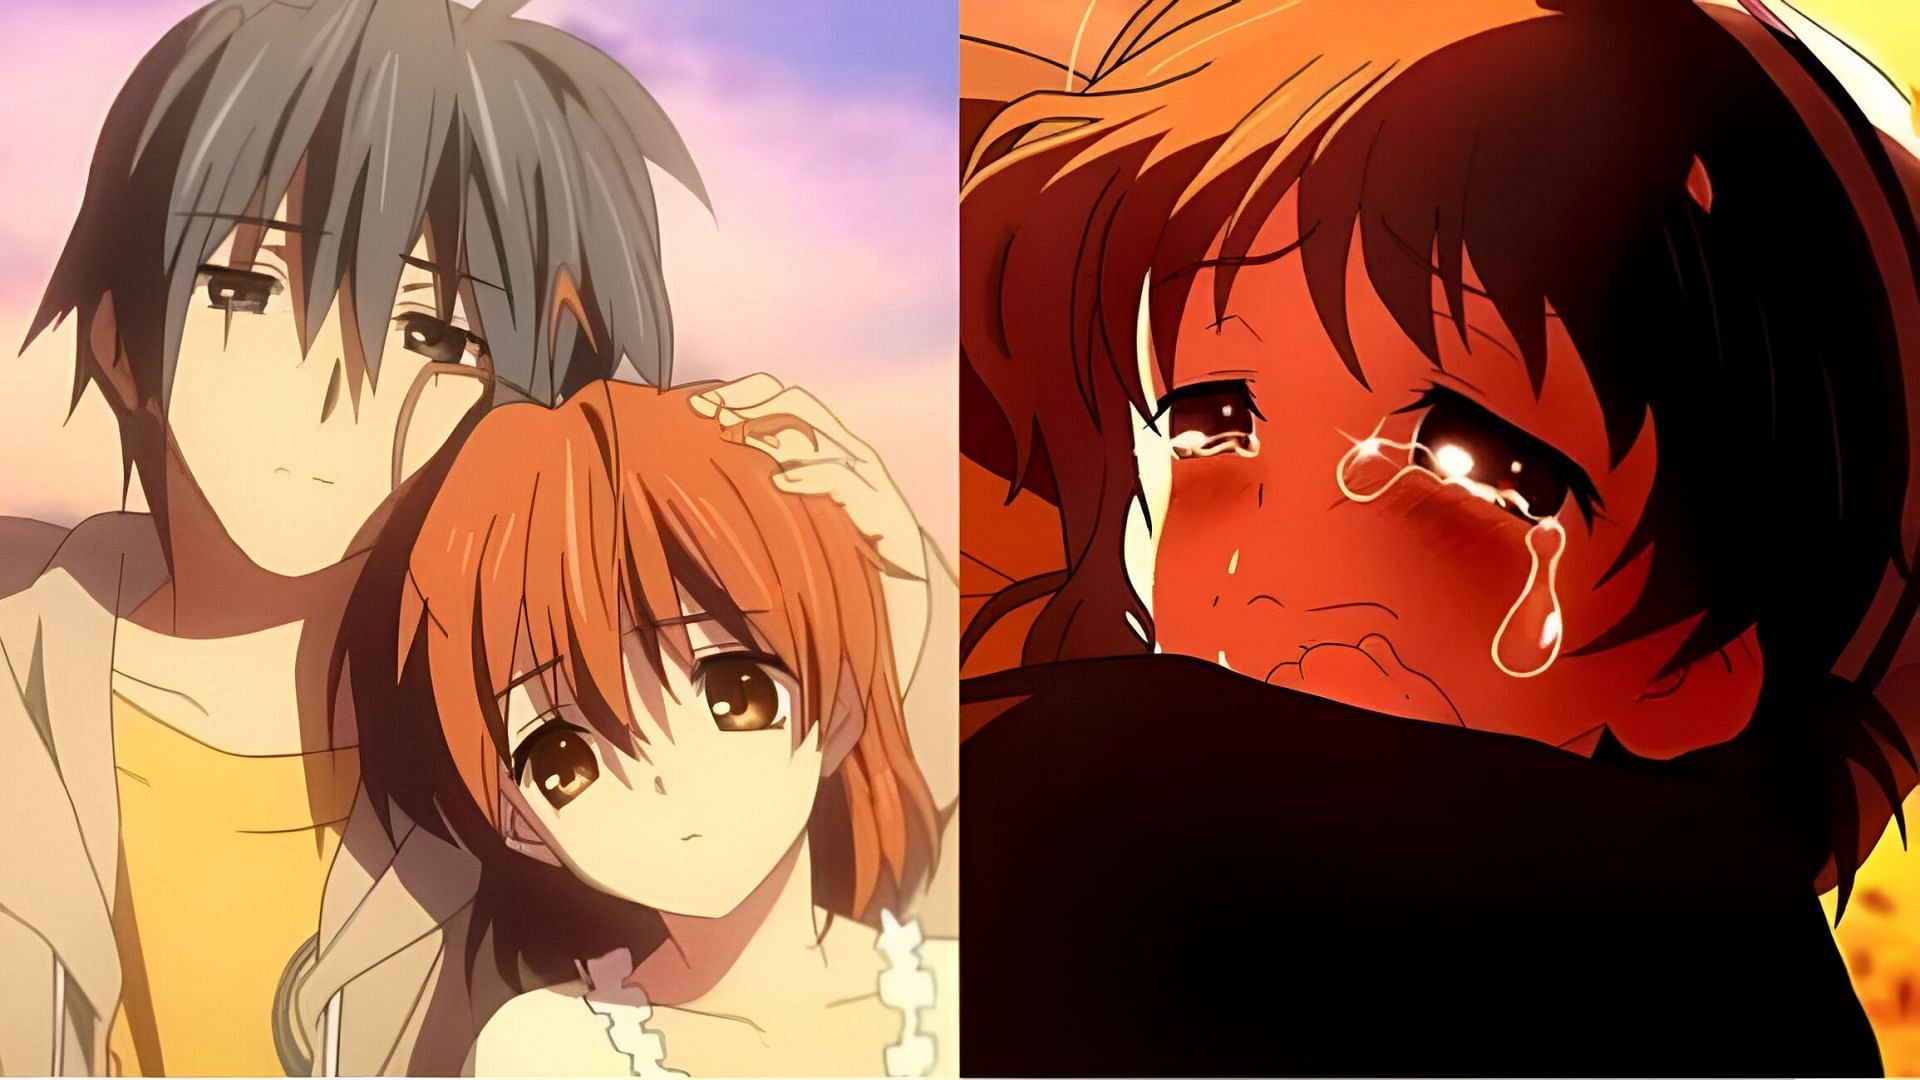 Why is Clannad considered one of the saddest anime of all time? The Series